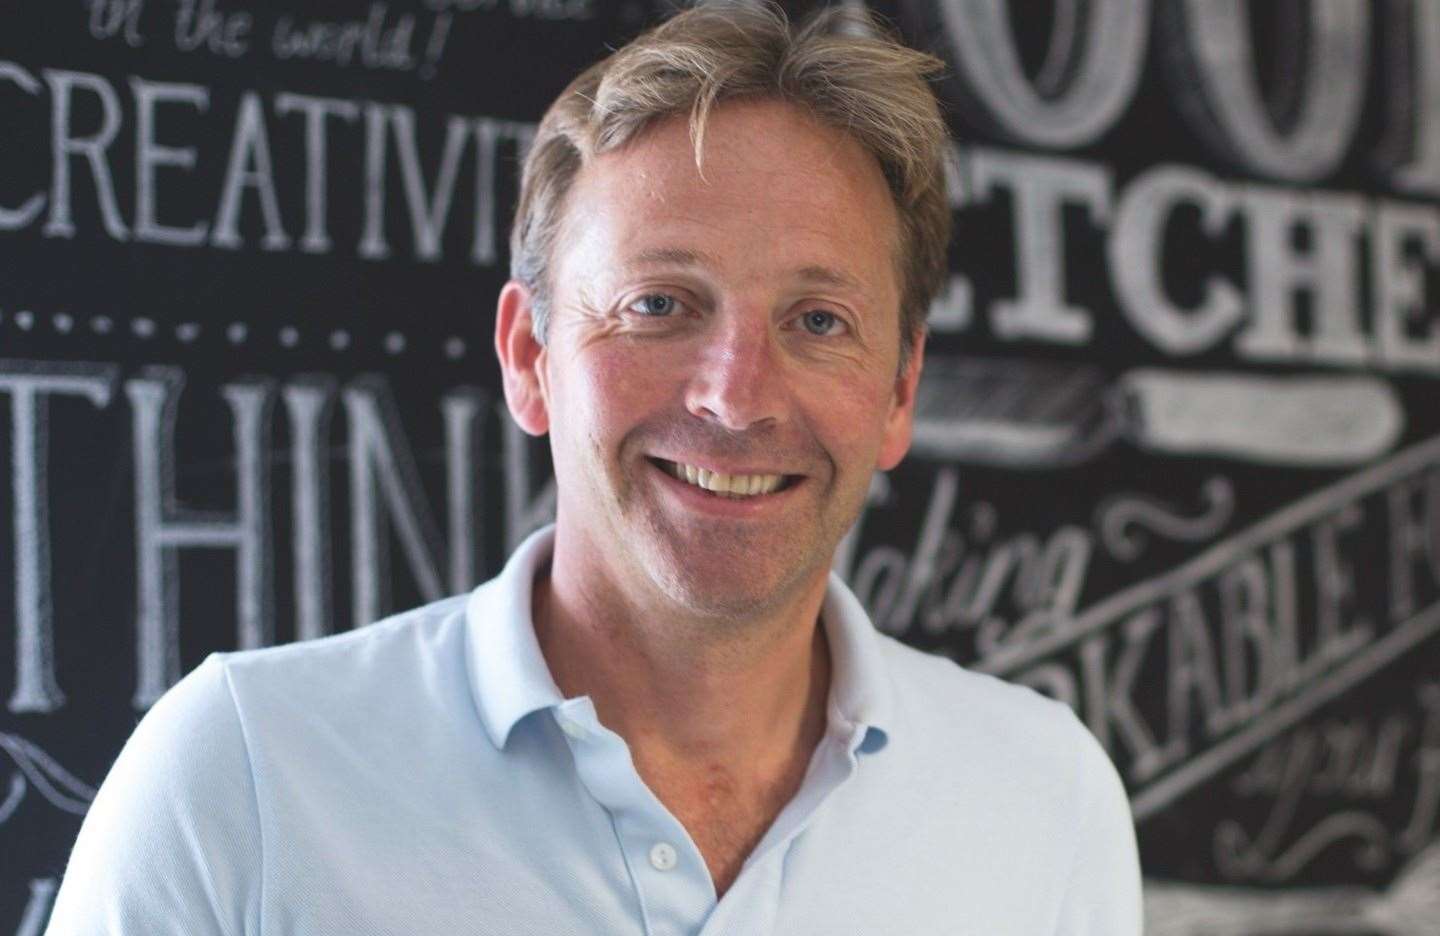 Edward Perry, co-CEO of Cook